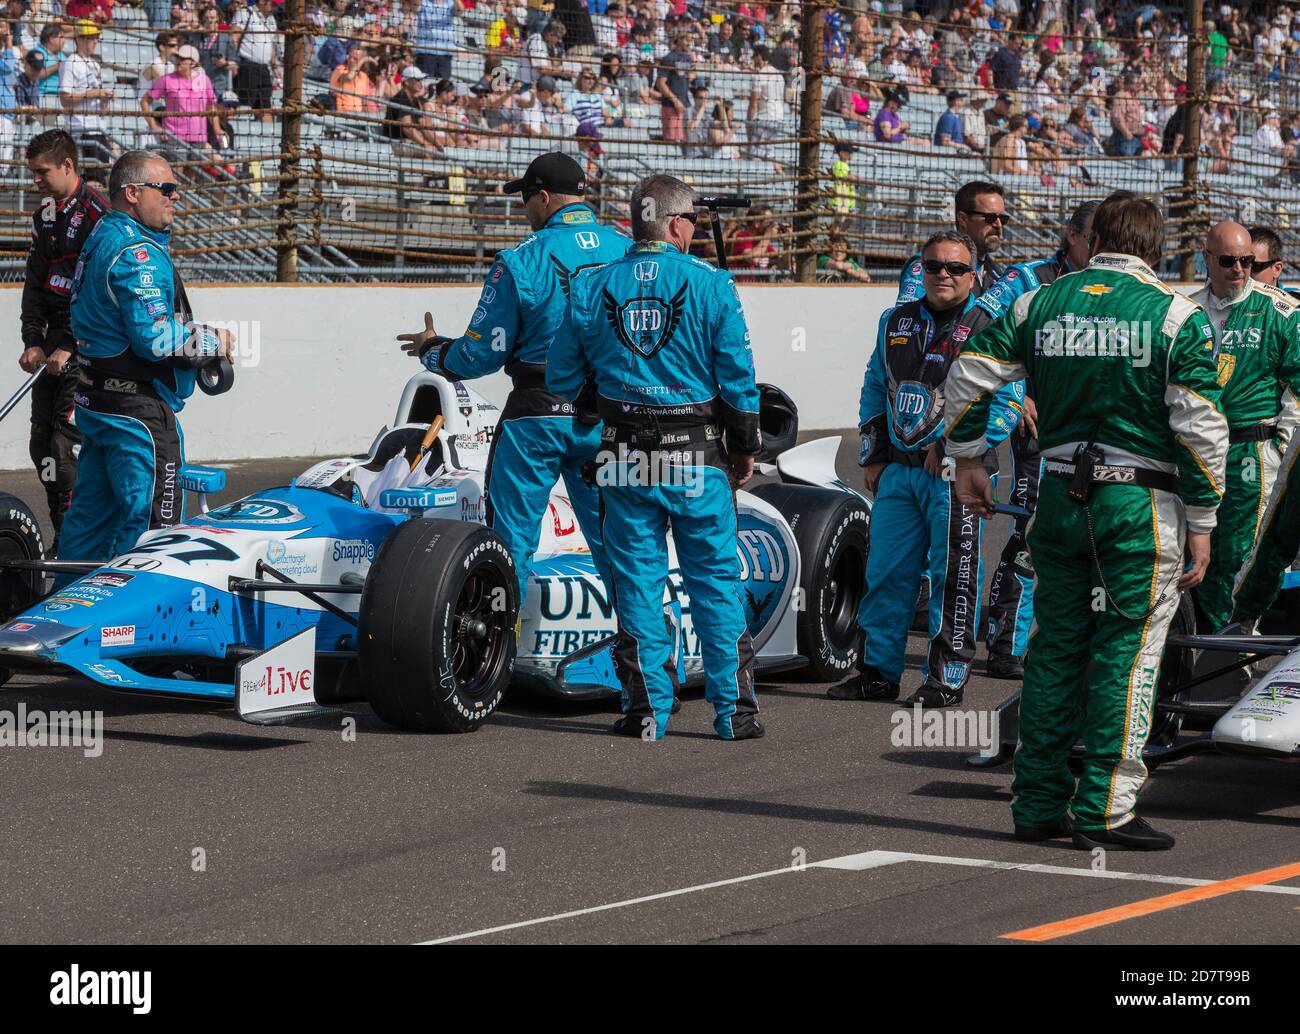 Indy 500 Race Day Stock Photo